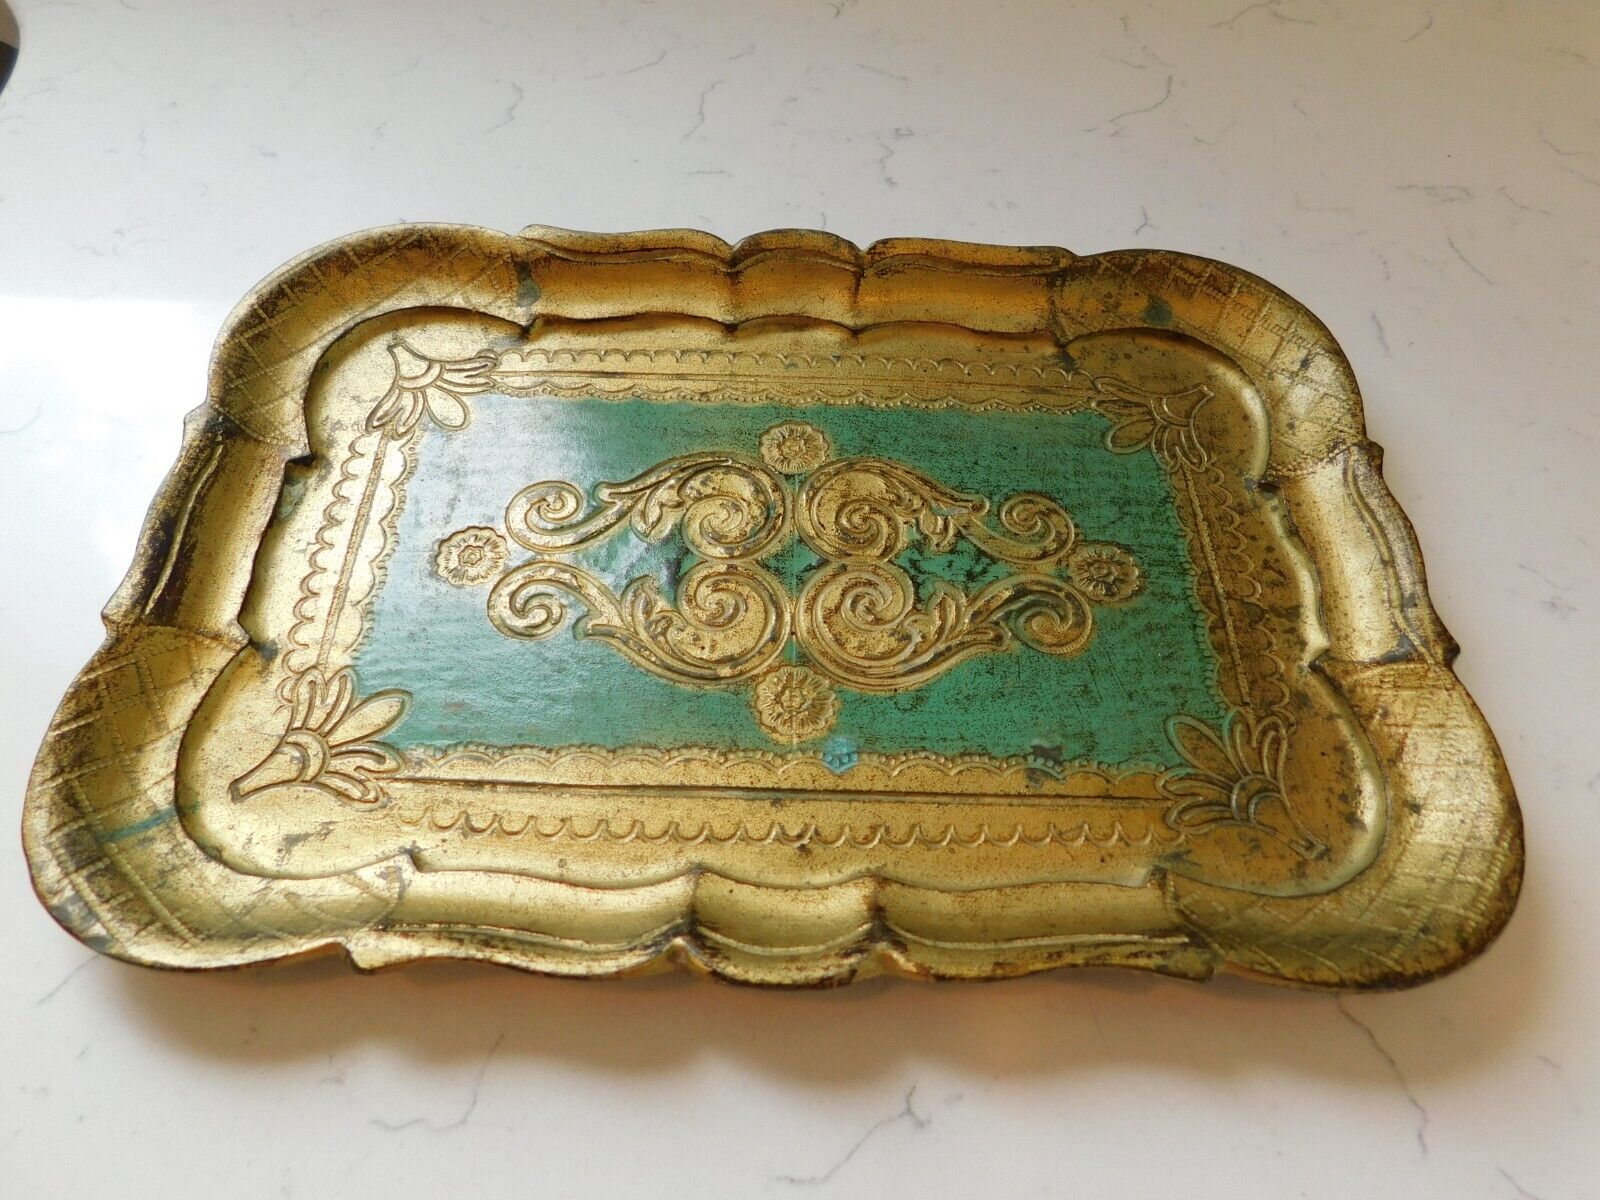 10 x 7 Vintage Italy Florentine Toleware Green/Gold Gilt Serving Display Tray